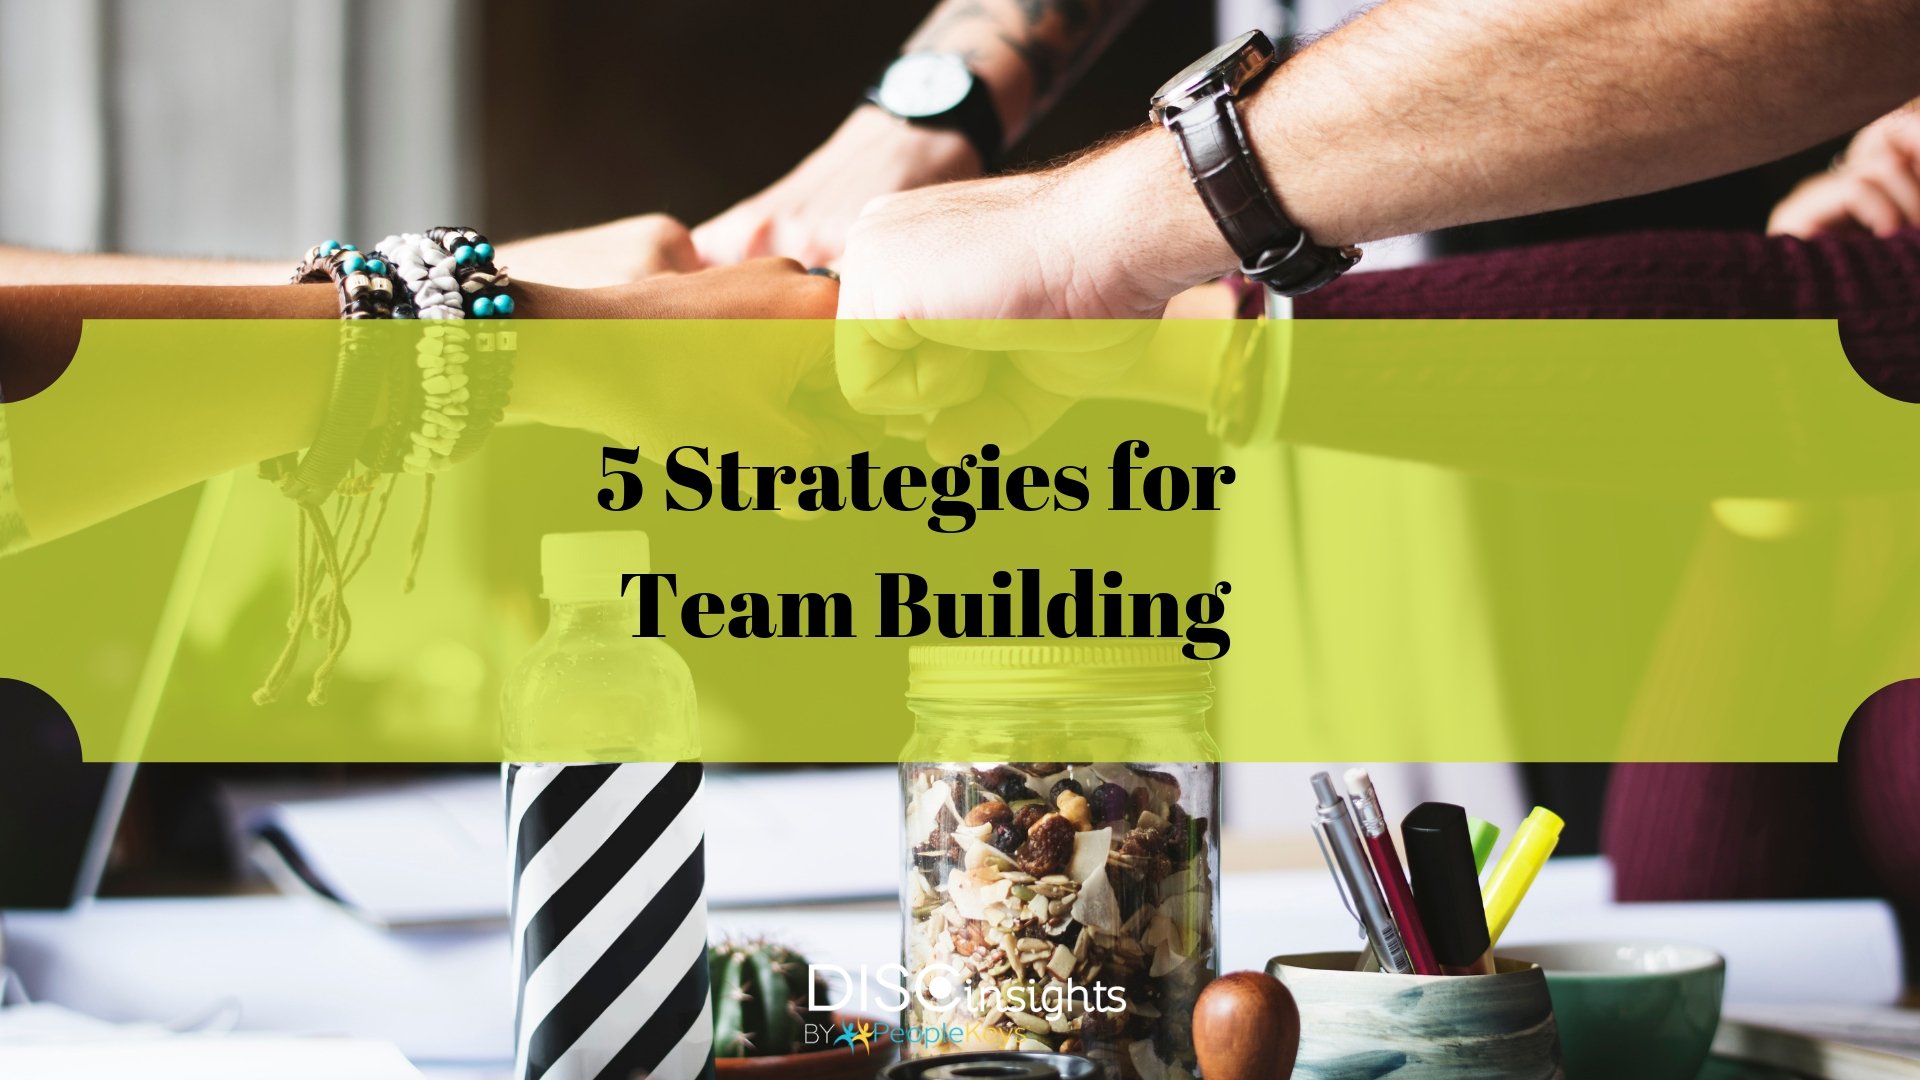 5 Strategies for Team Building